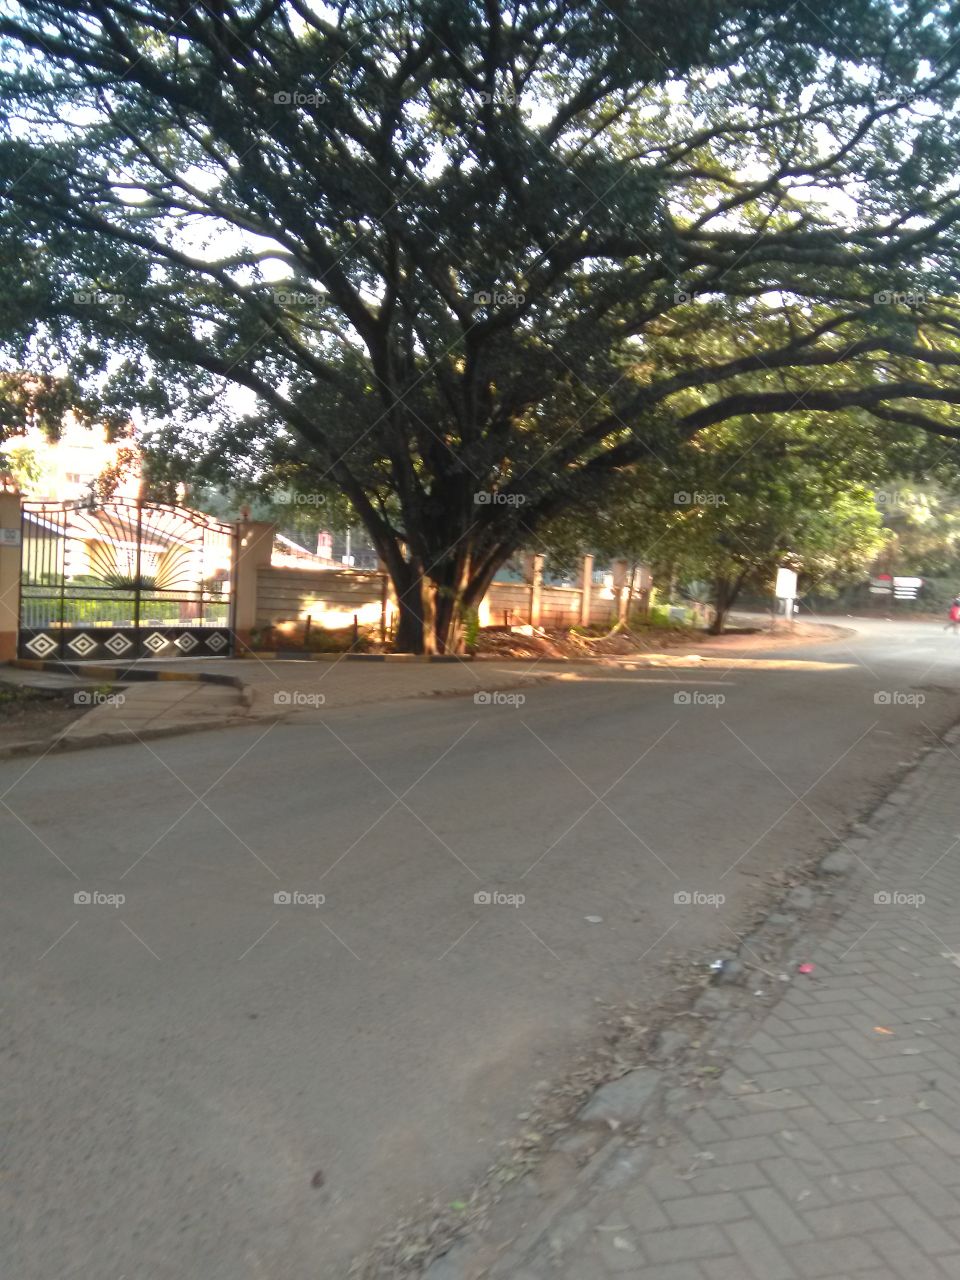 This is a canopy formed by an indigenous tree in Westlands which is a Nairobi City surburb in Kenya.